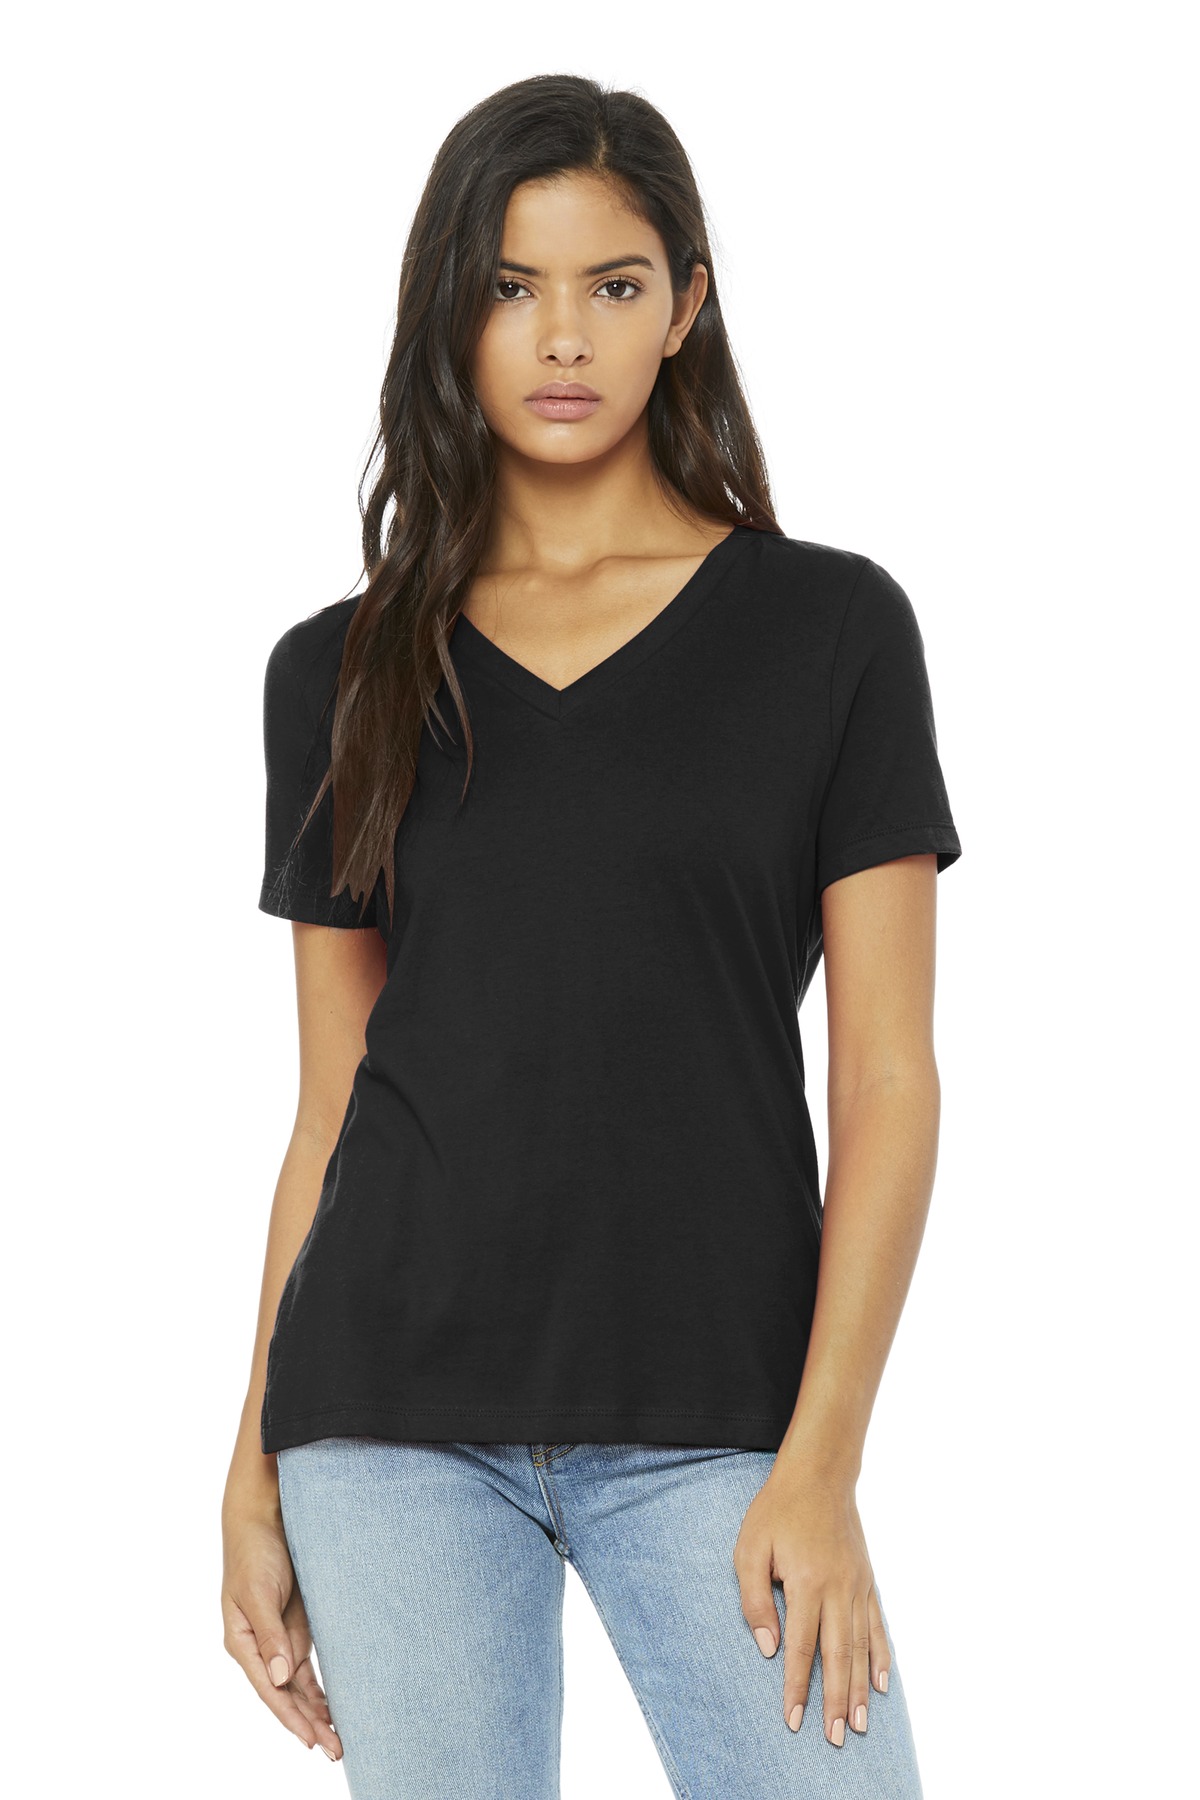 BELLA+CANVAS Women''s Relaxed Jersey Short Sleeve V-Neck Tee. BC6405